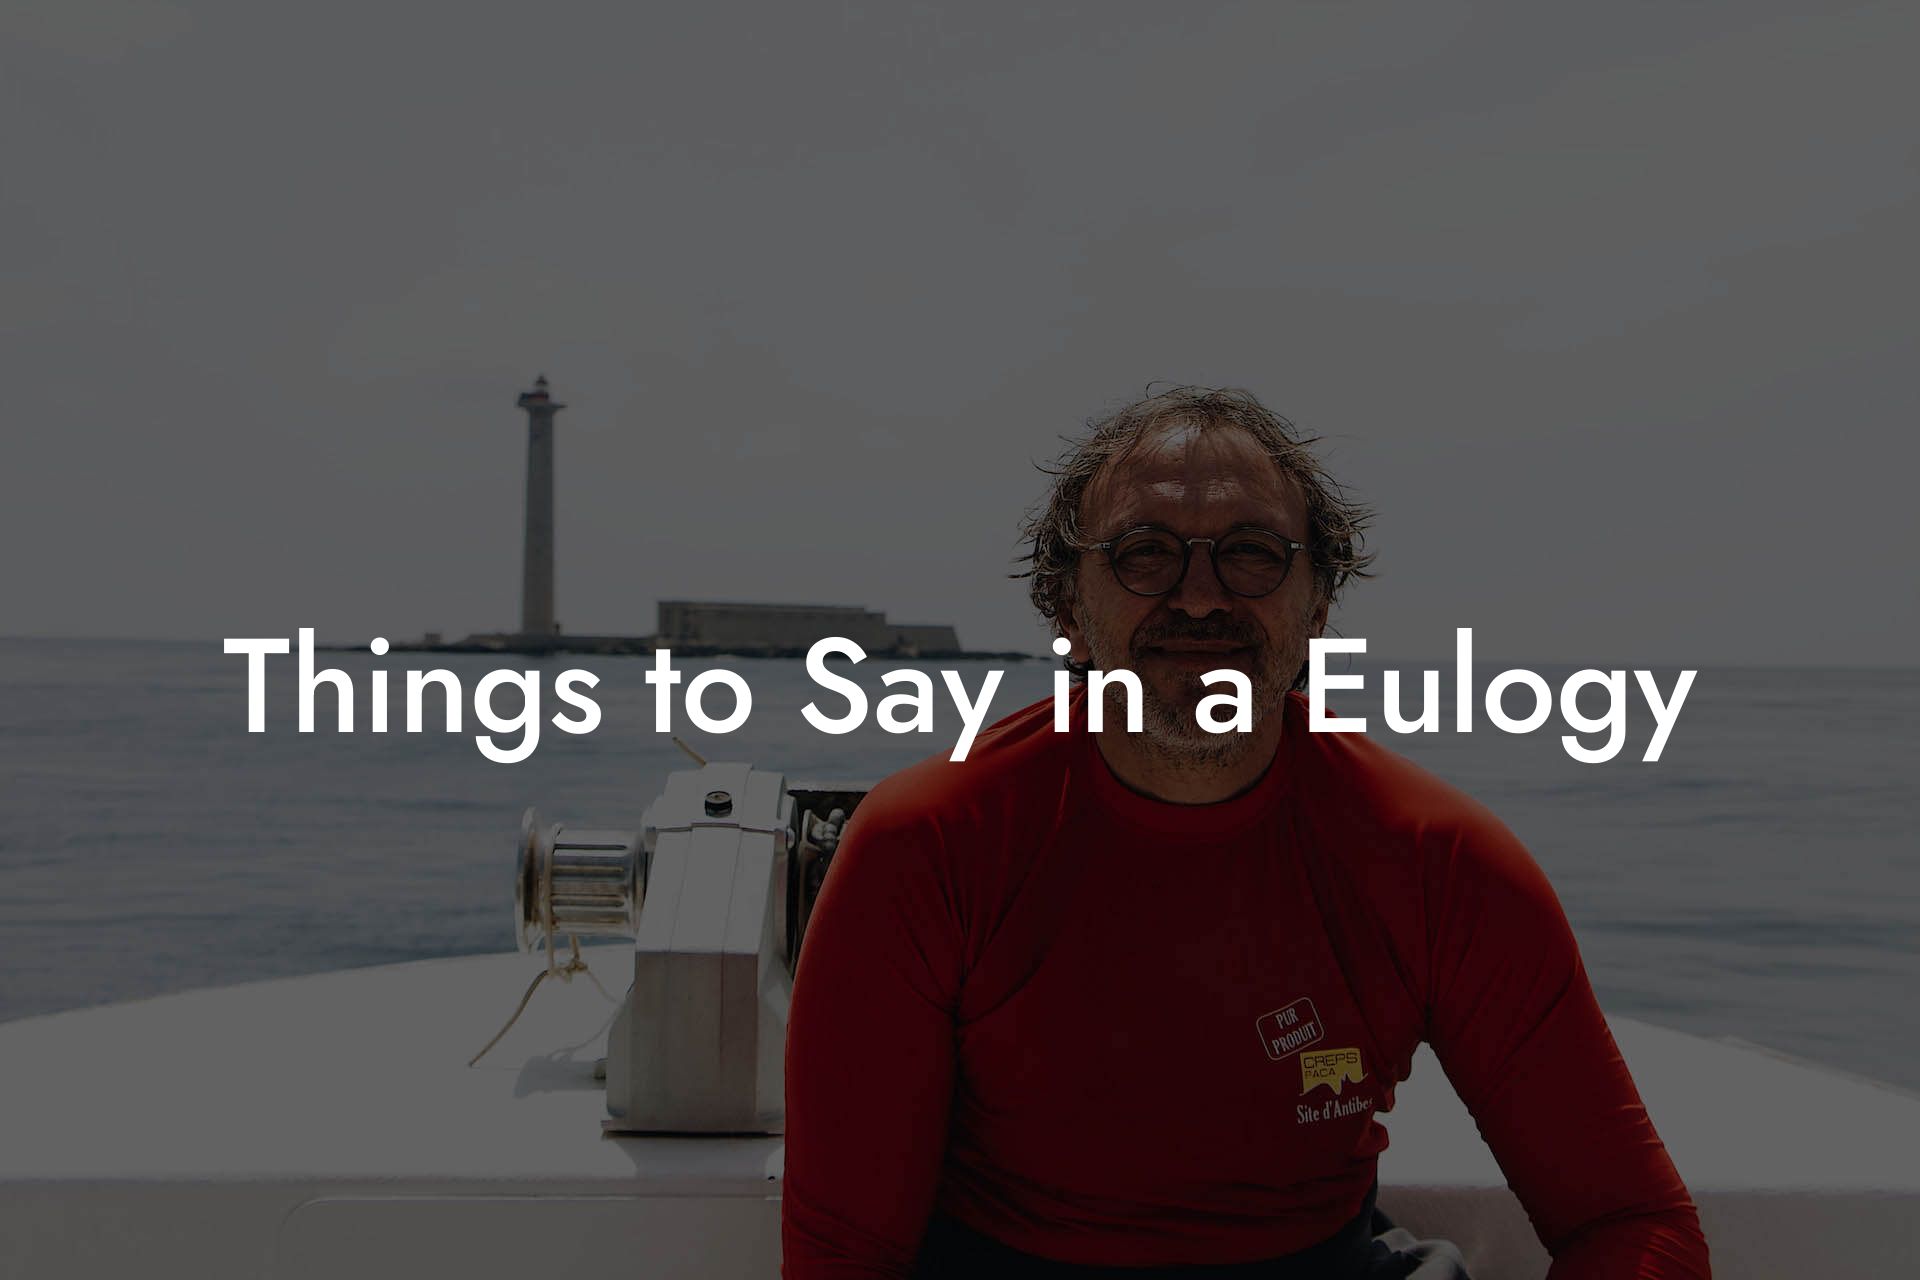 Things to Say in a Eulogy